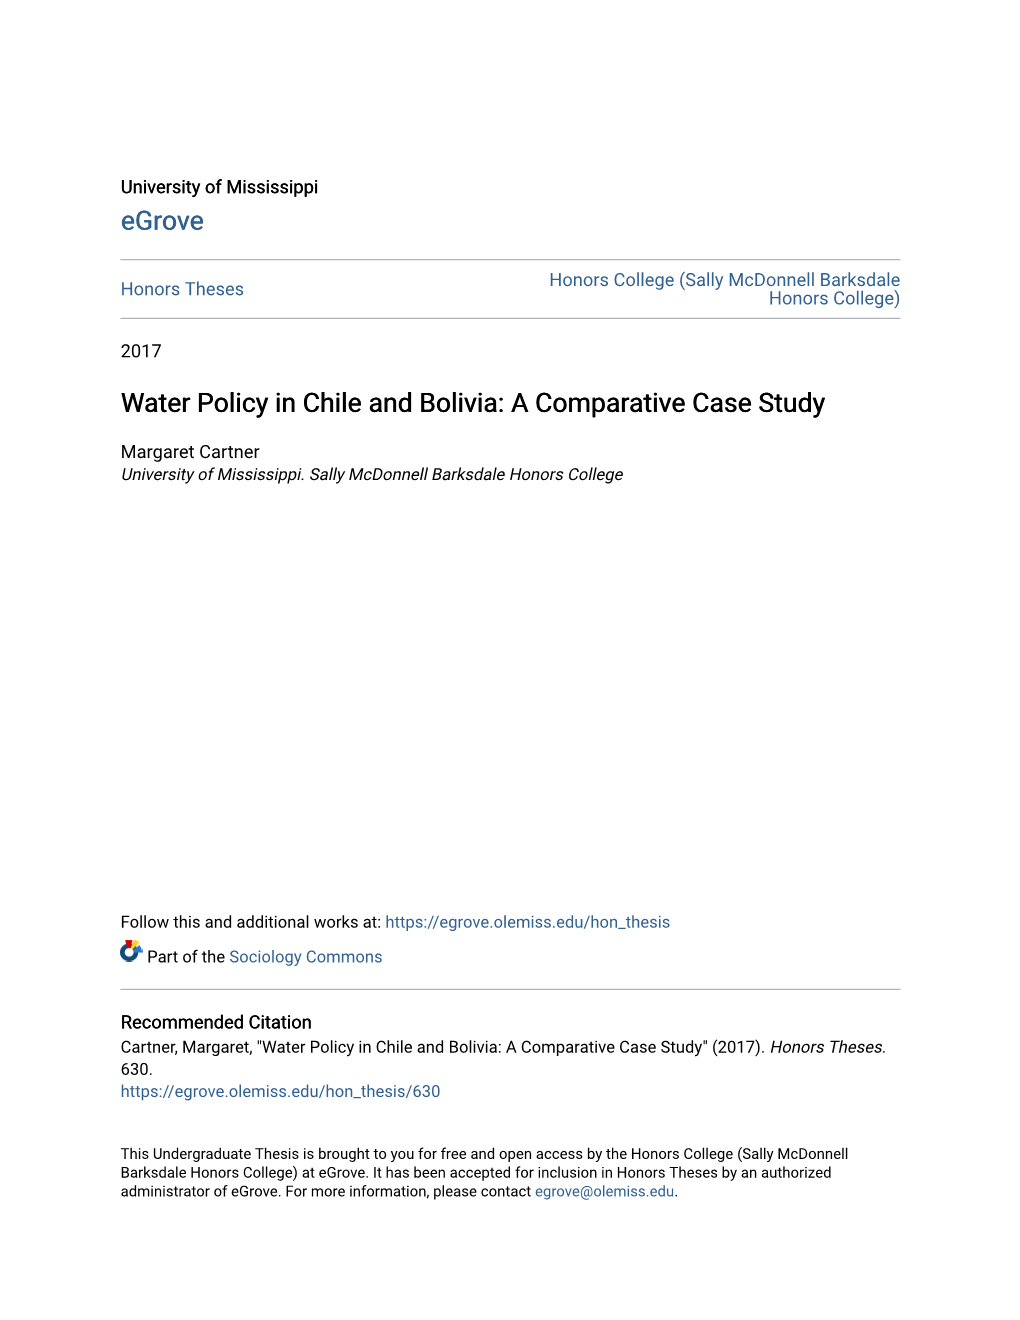 Water Policy in Chile and Bolivia: a Comparative Case Study